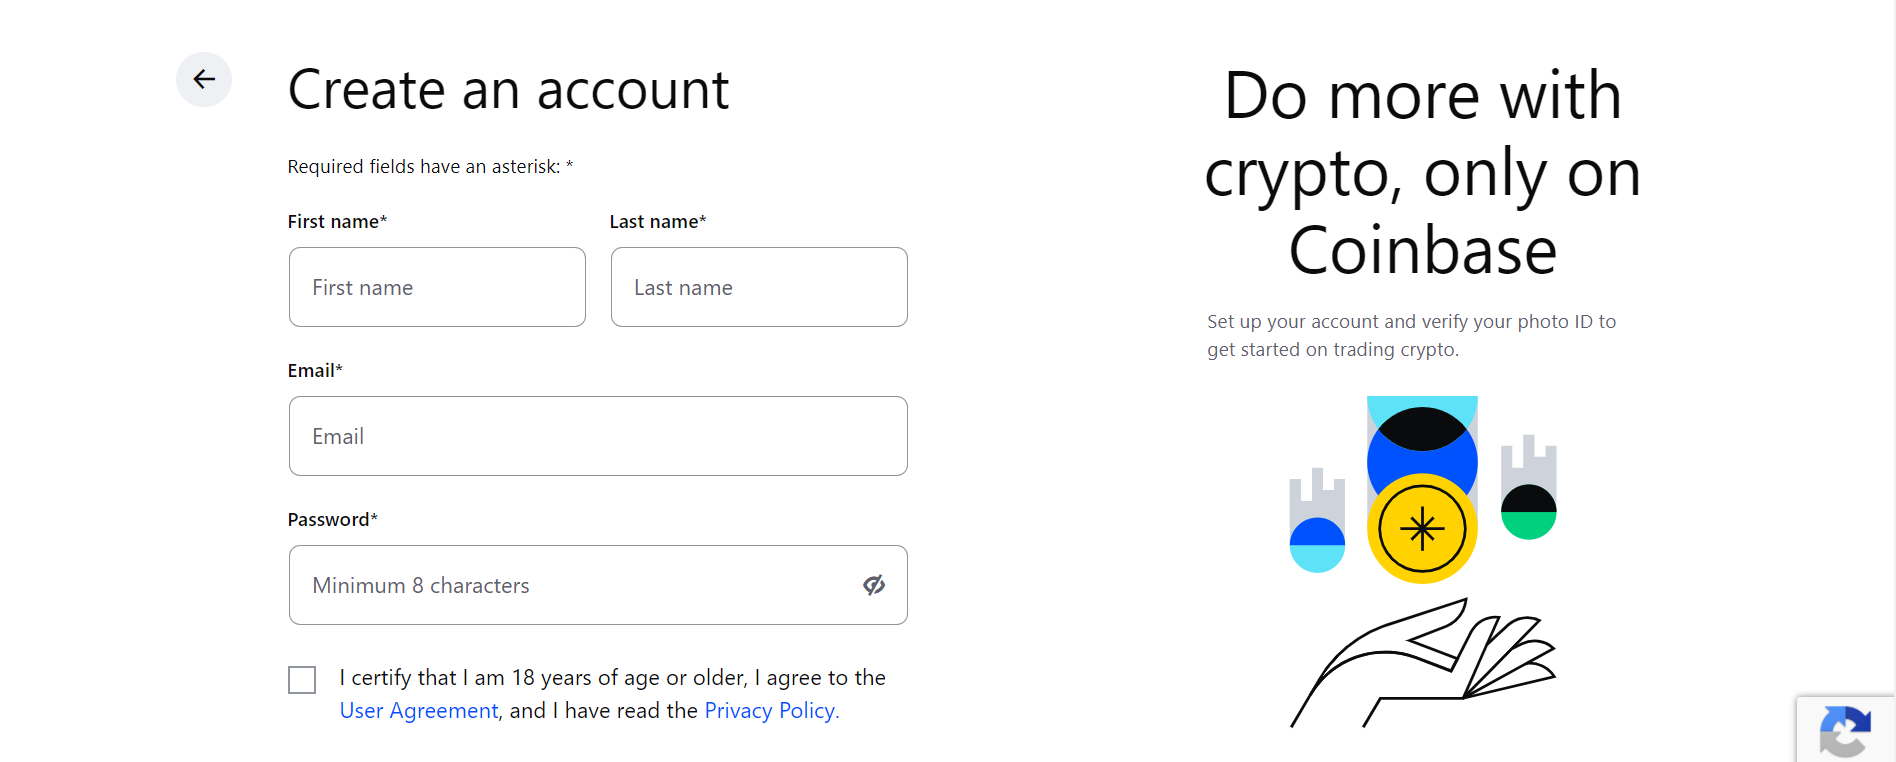 How to open account on Coinbase